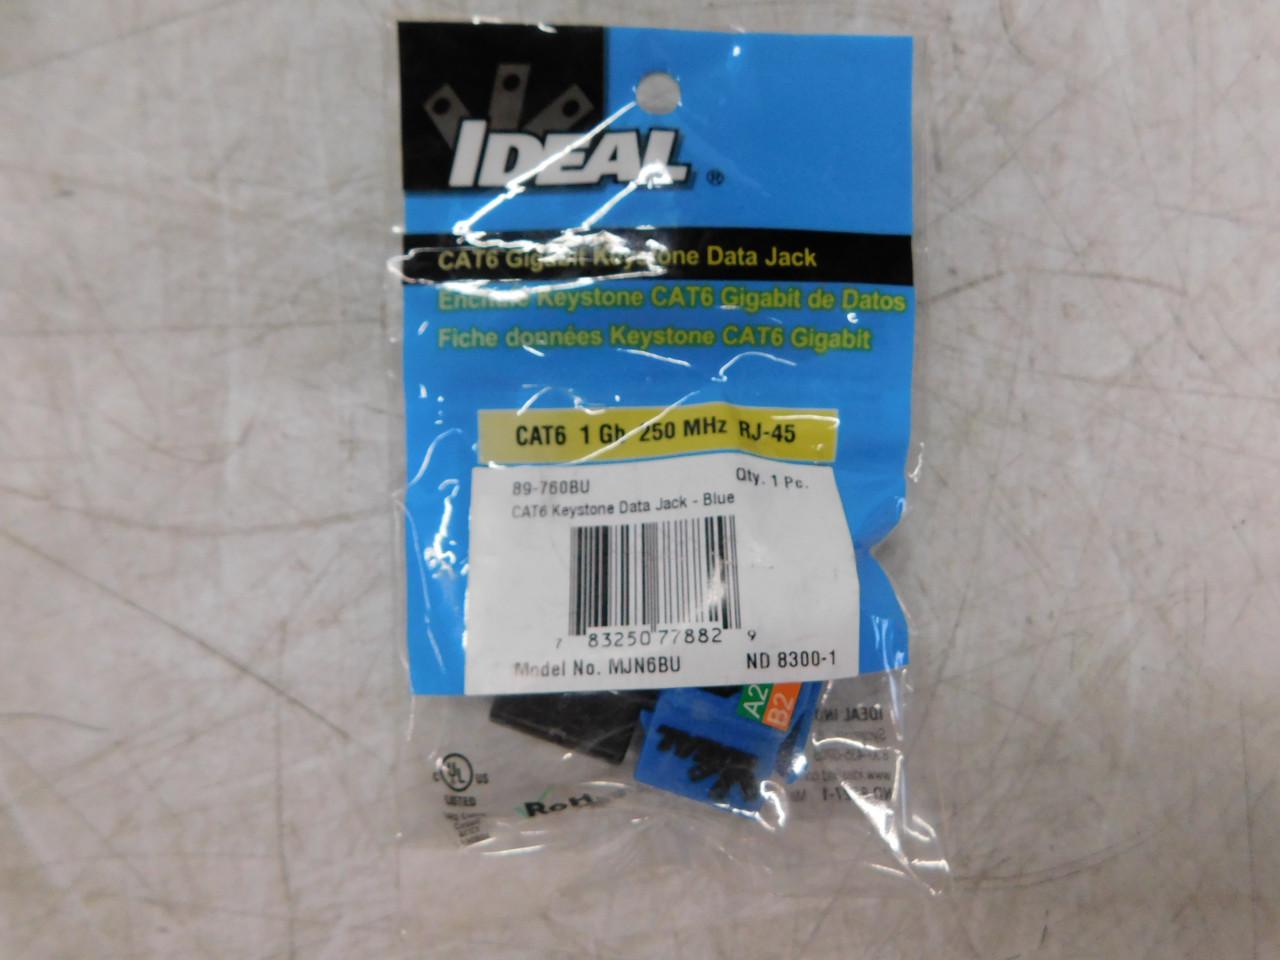 Ideal Industries 89-760BU 1000 V, 1.5 A, 8-Conductor, 22 to 44 AWG UTP Copper Cable, 250 MHz, Blue, Category 6, Keystone Modular Data Jack (1 per Bag)